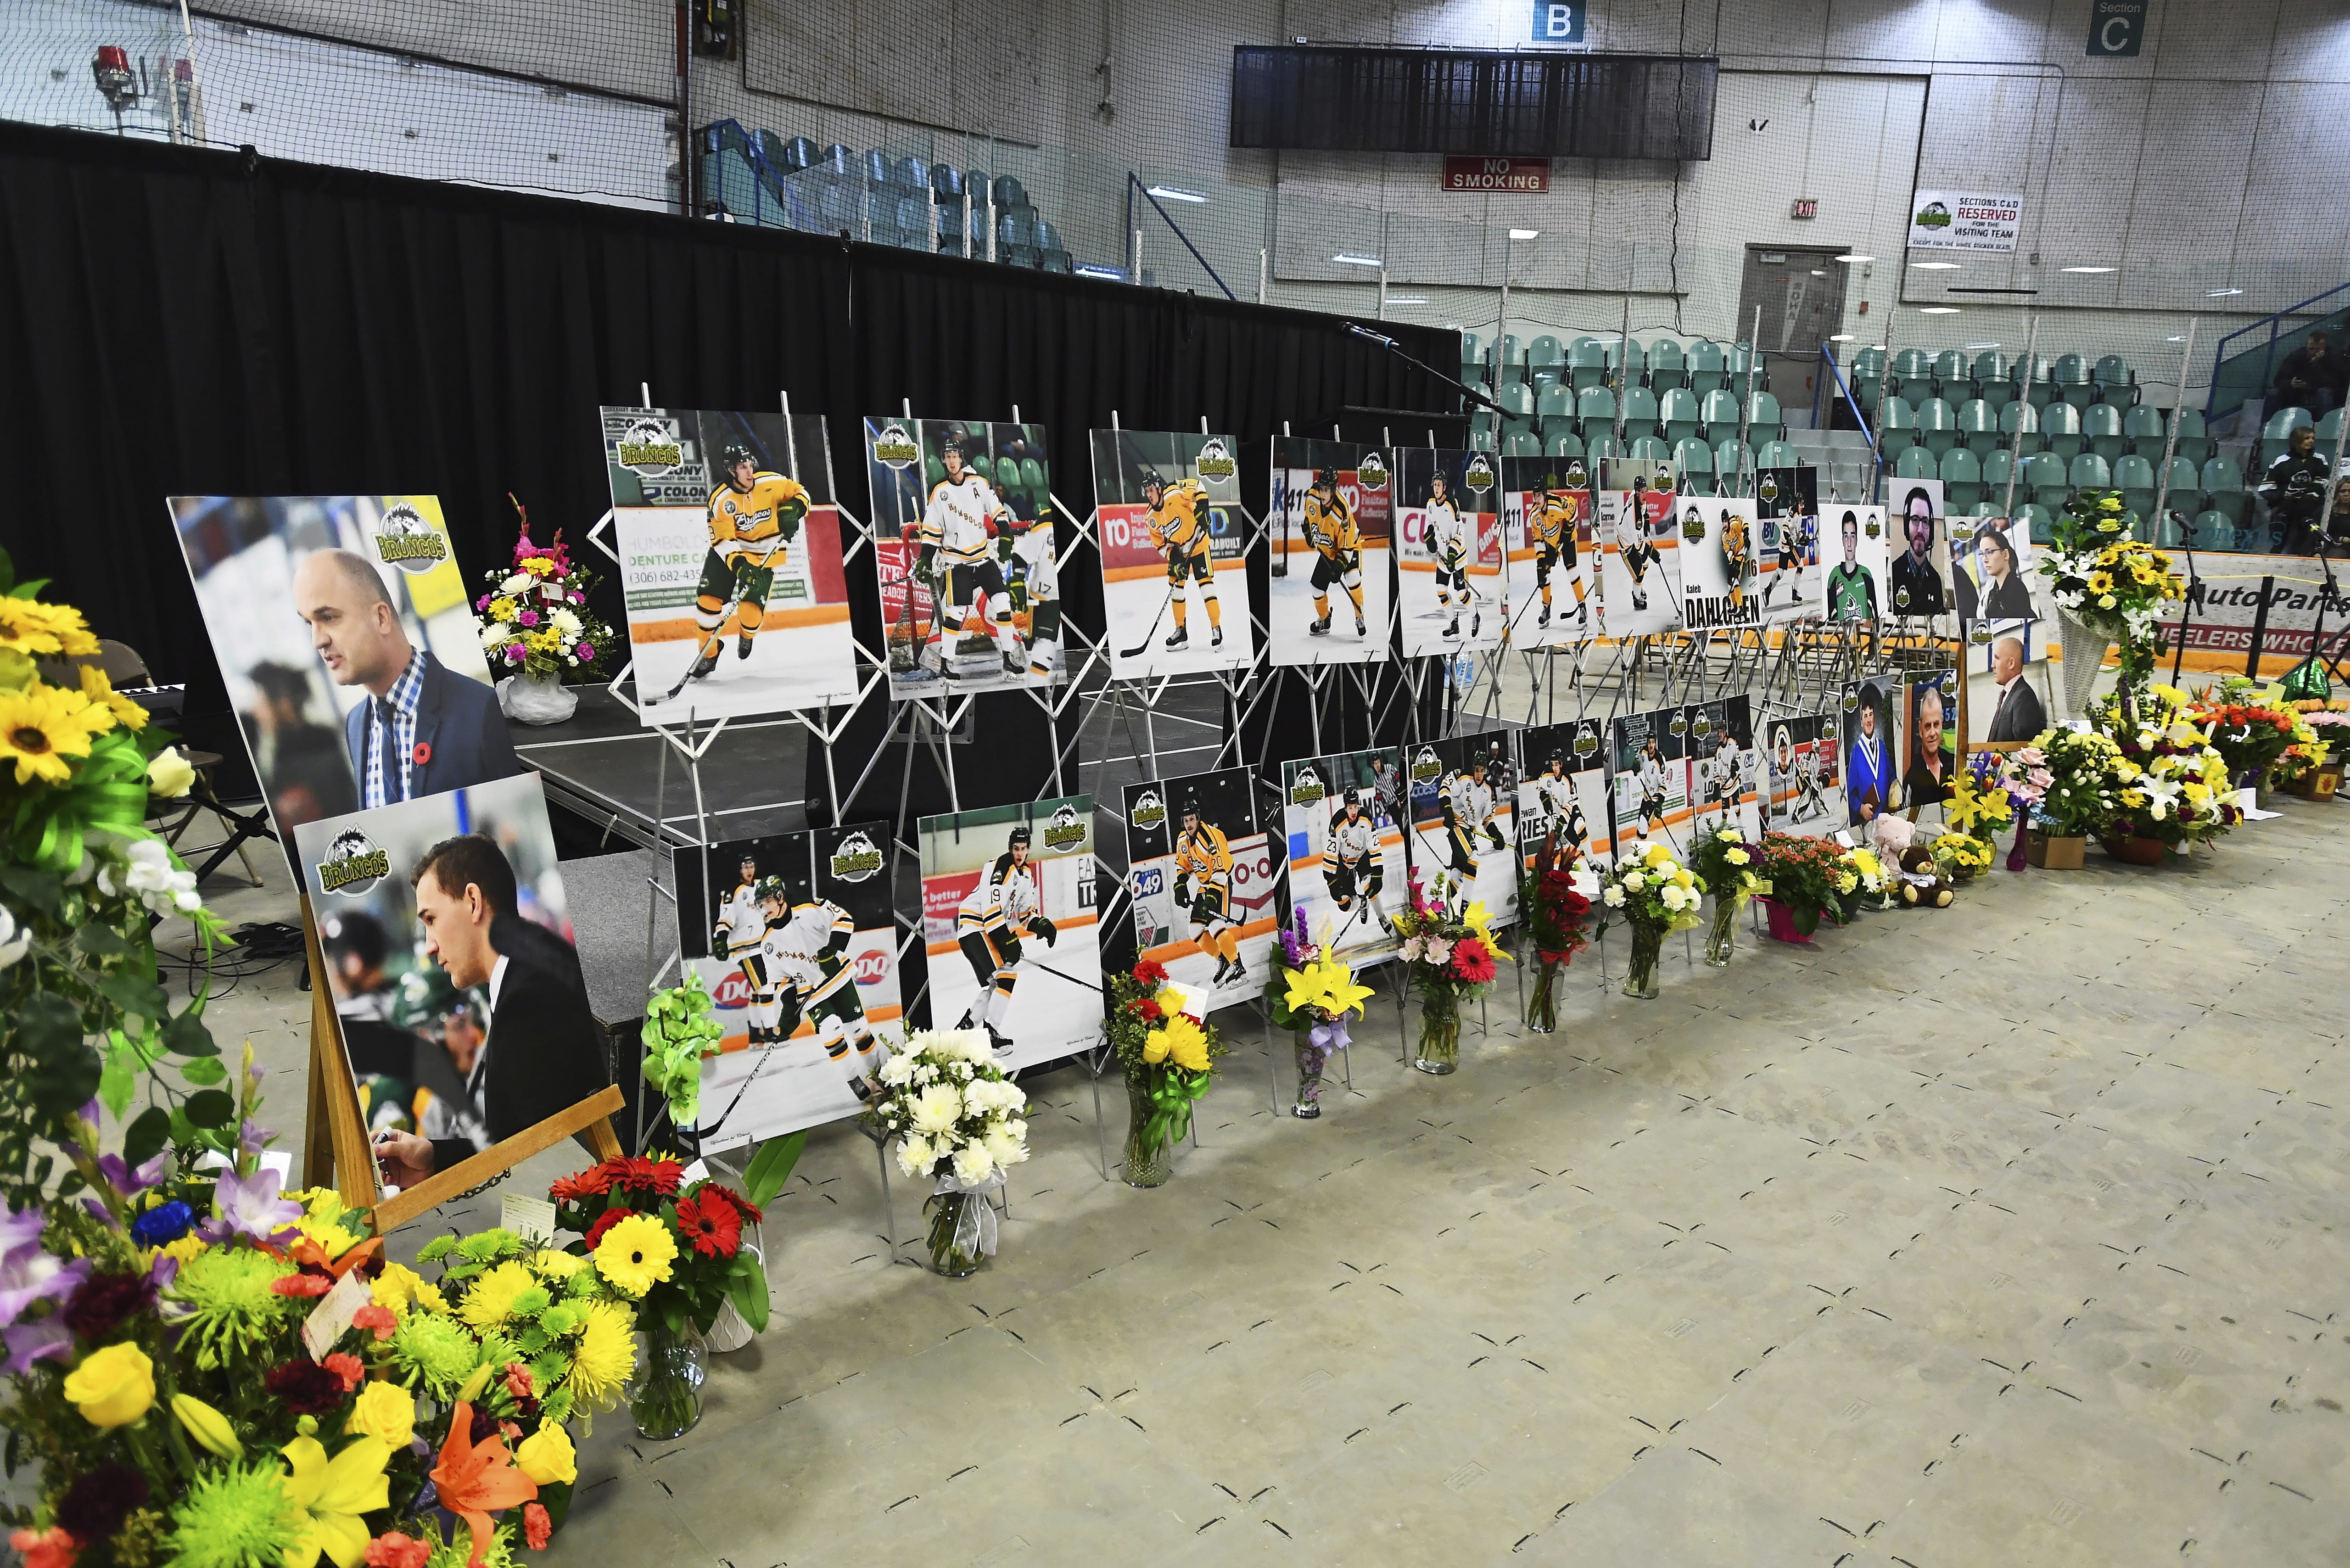 Photos of people involved in a fatal bus crash are seen prior to a vigil at the Elgar Petersen Arena, home of the Humboldt Broncos, in Humboldt, Saskatchewan on Sunday, April 8, 2018.